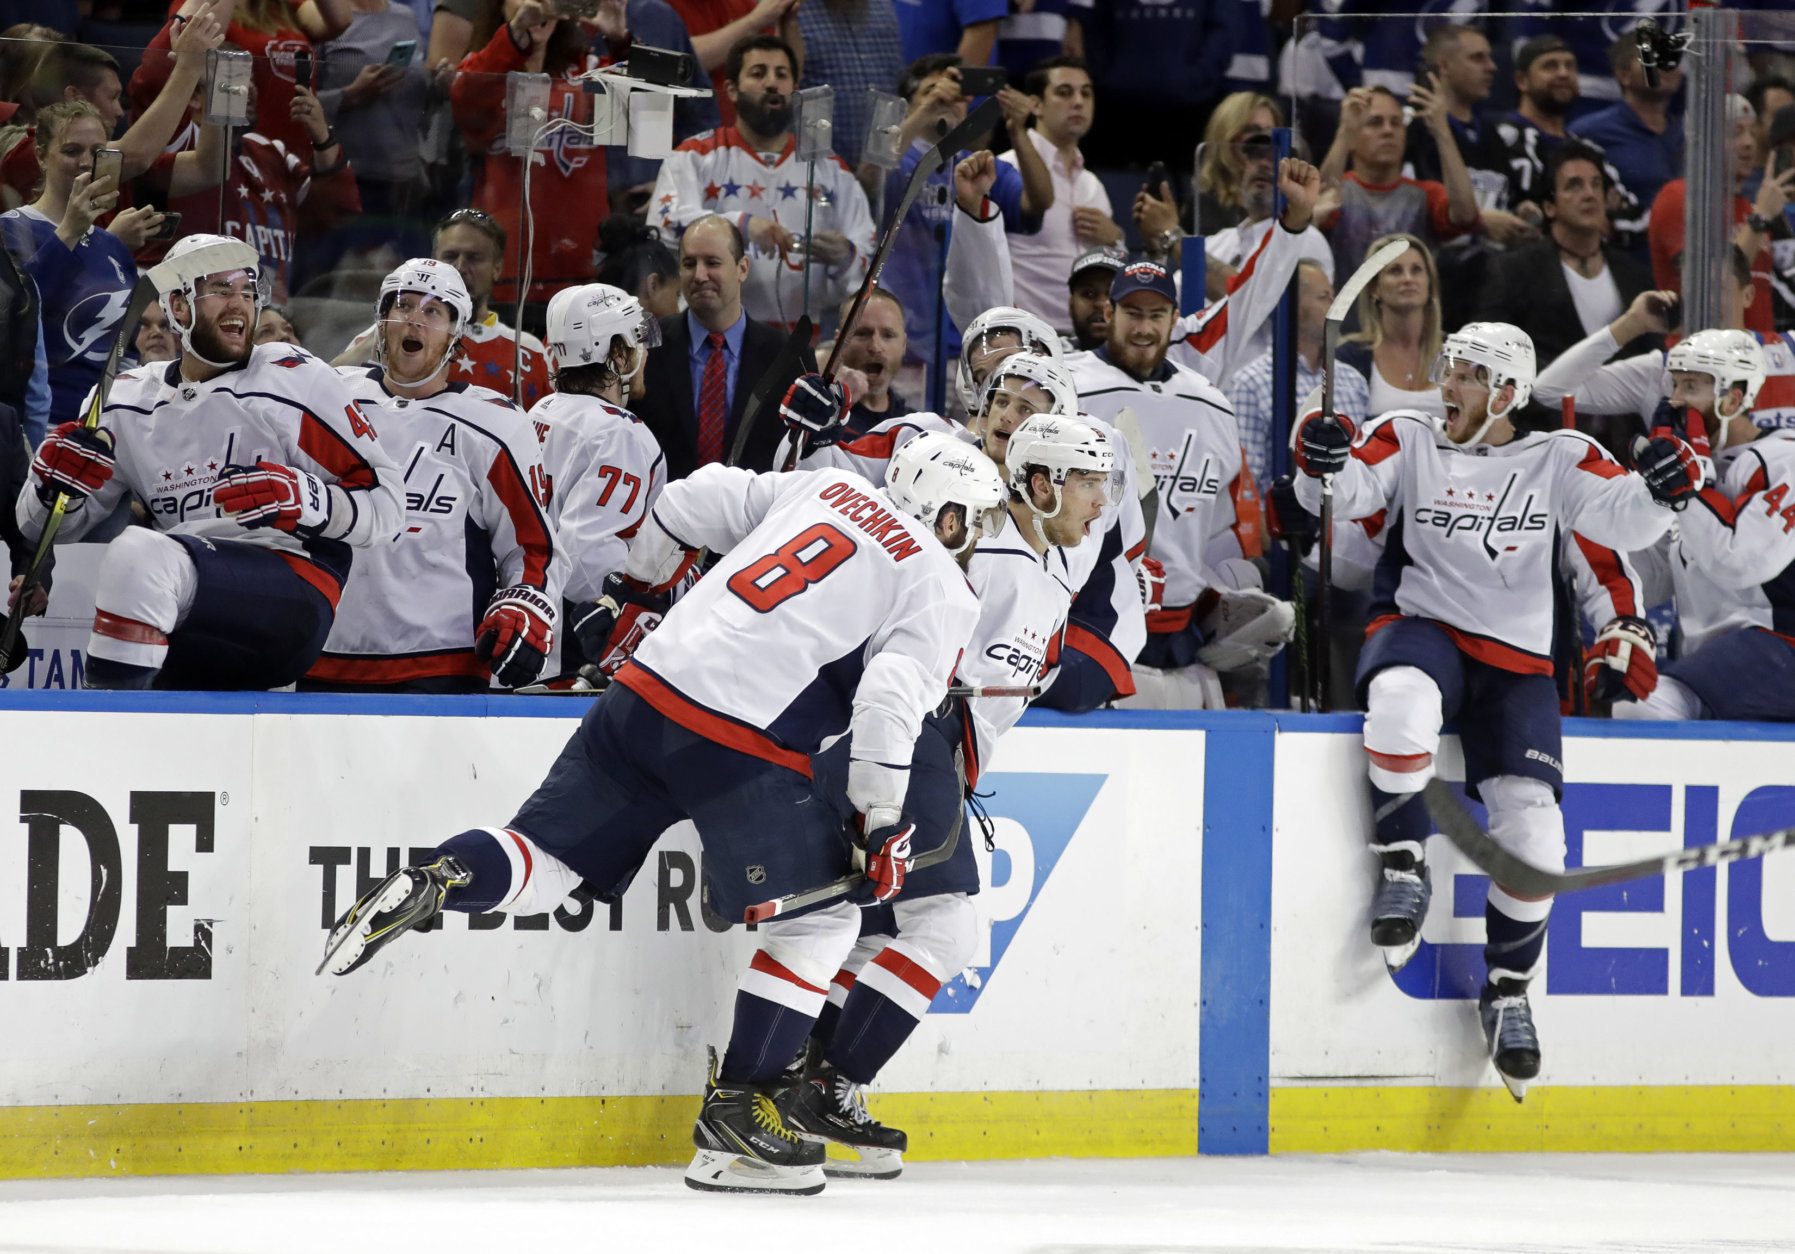 Washington Capitals, including left wing Alex Ovechkin (8). celebrate after defeating the Tampa Bay Lightning in Game 7 of the NHL Eastern Conference finals hockey playoff series Wednesday, May 23, 2018, in Tampa, Fla. (AP Photo/Chris O'Meara)